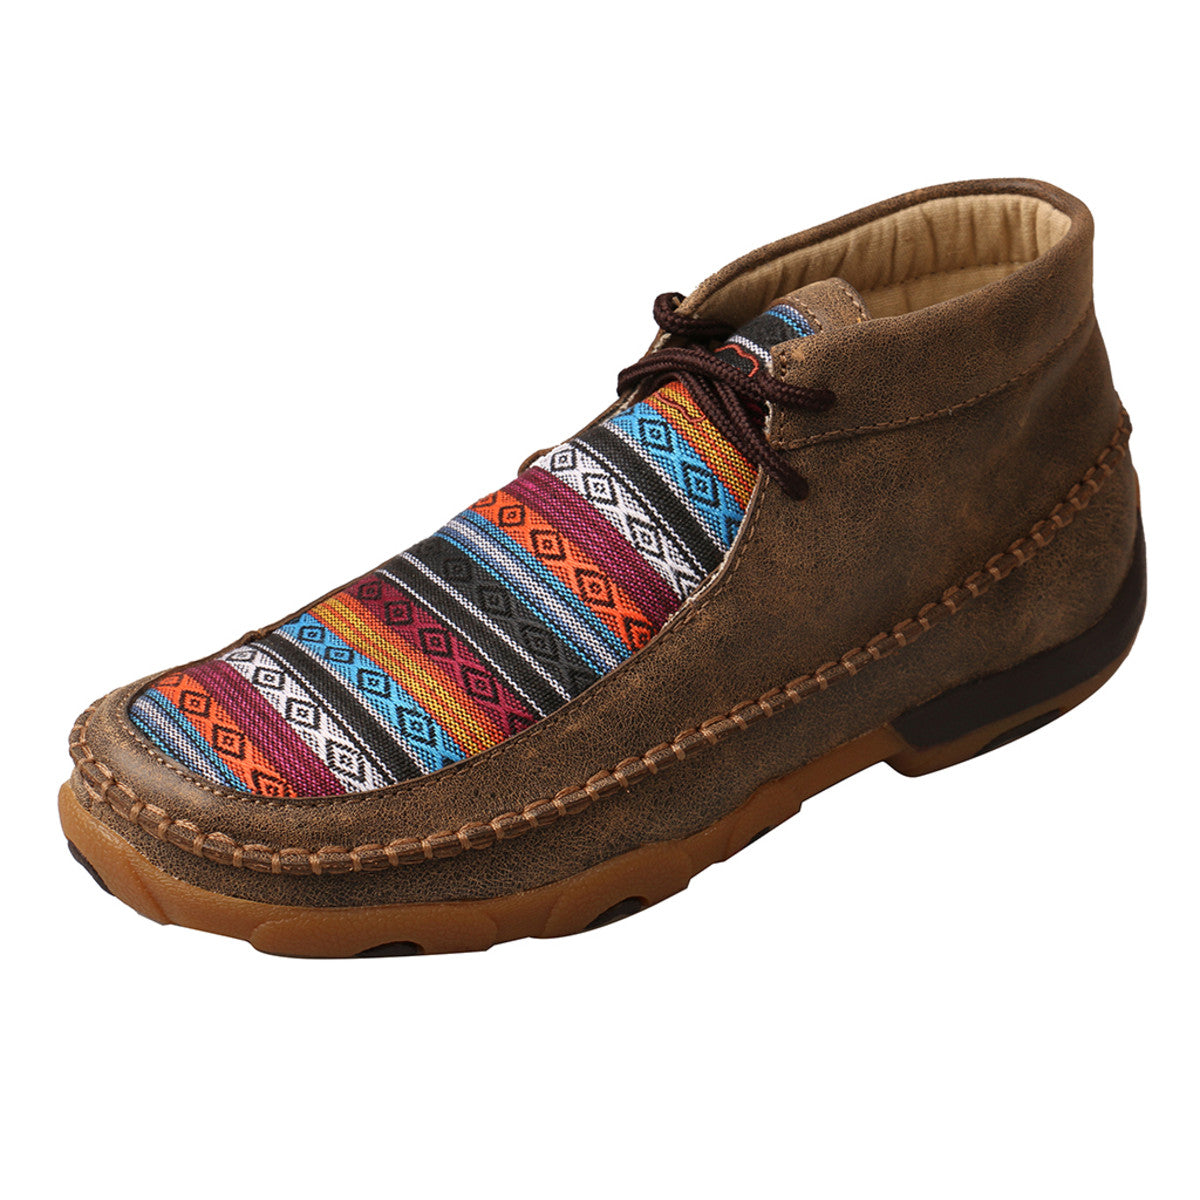 Women's Twisted X Chukka Driving Moccasins Shoe in Bomber & Multi Pattern from the side view